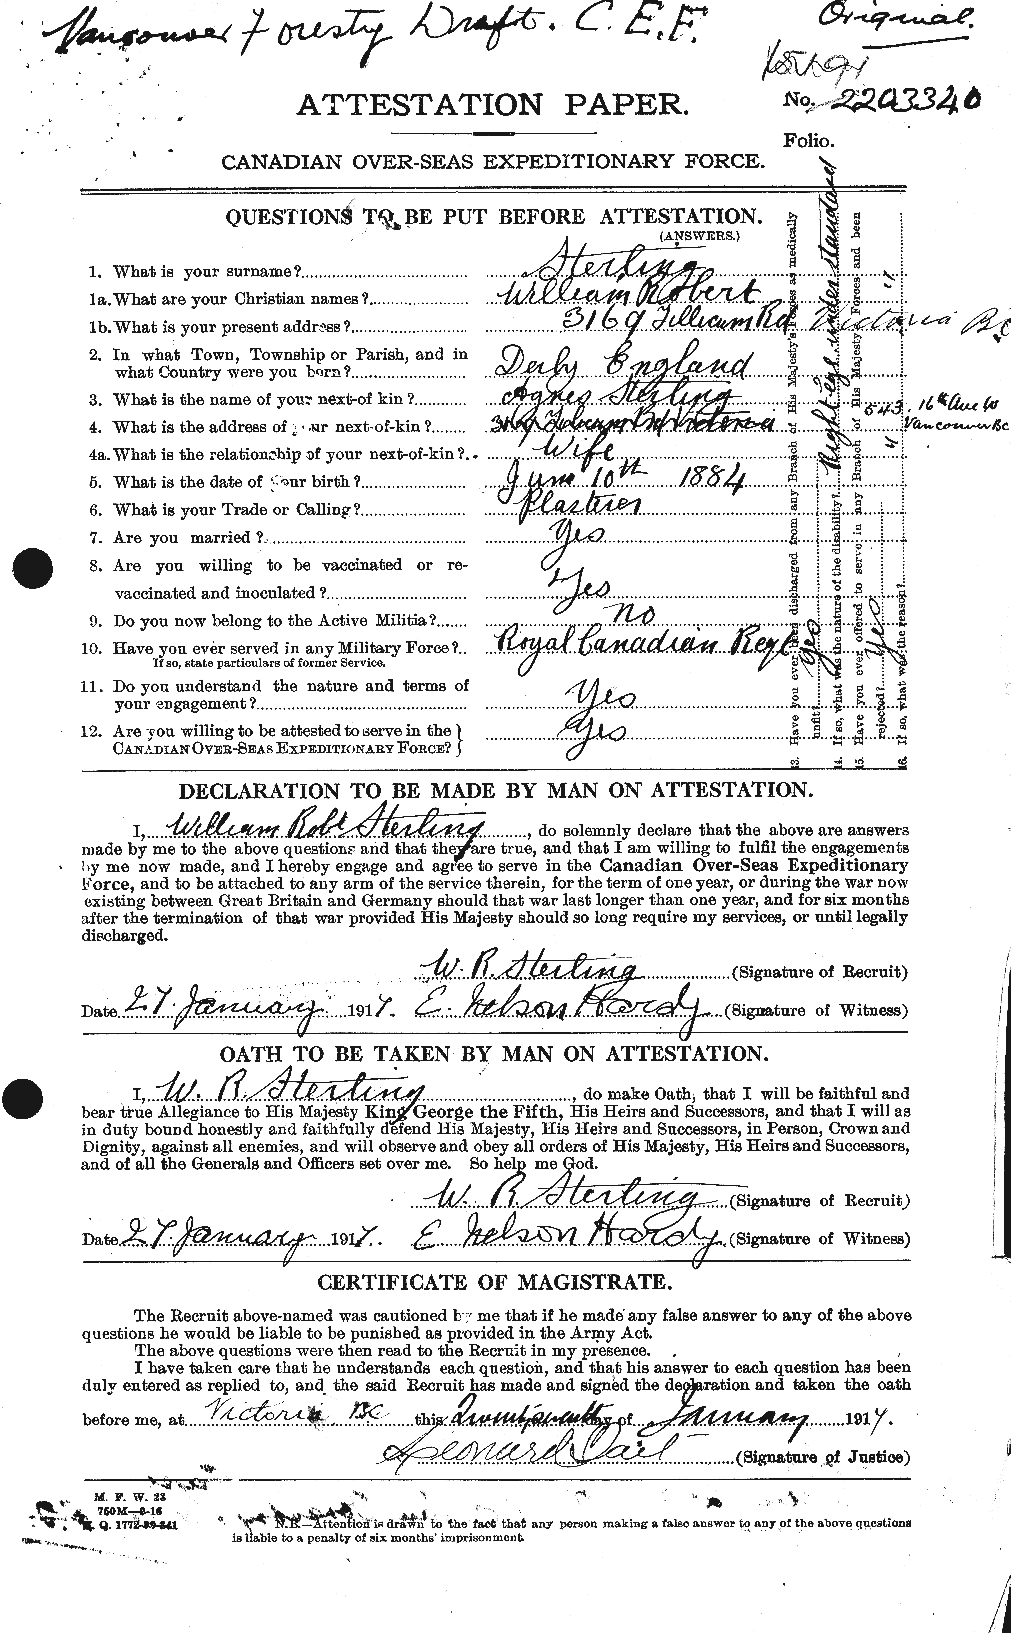 Personnel Records of the First World War - CEF 115147a